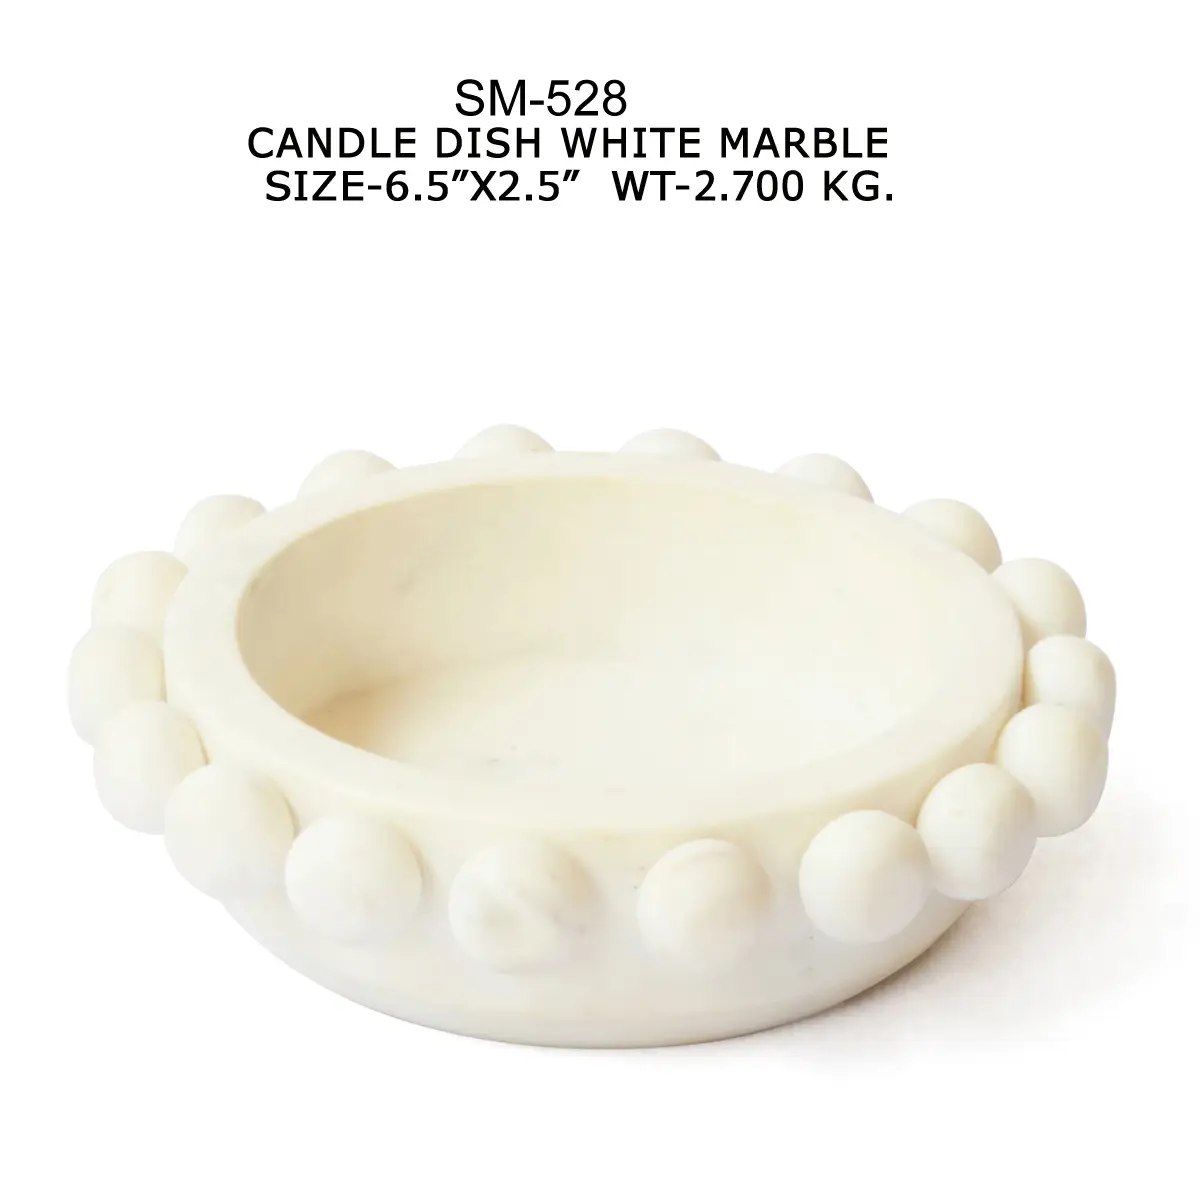 CANDLE DISH WHITE MARBLE